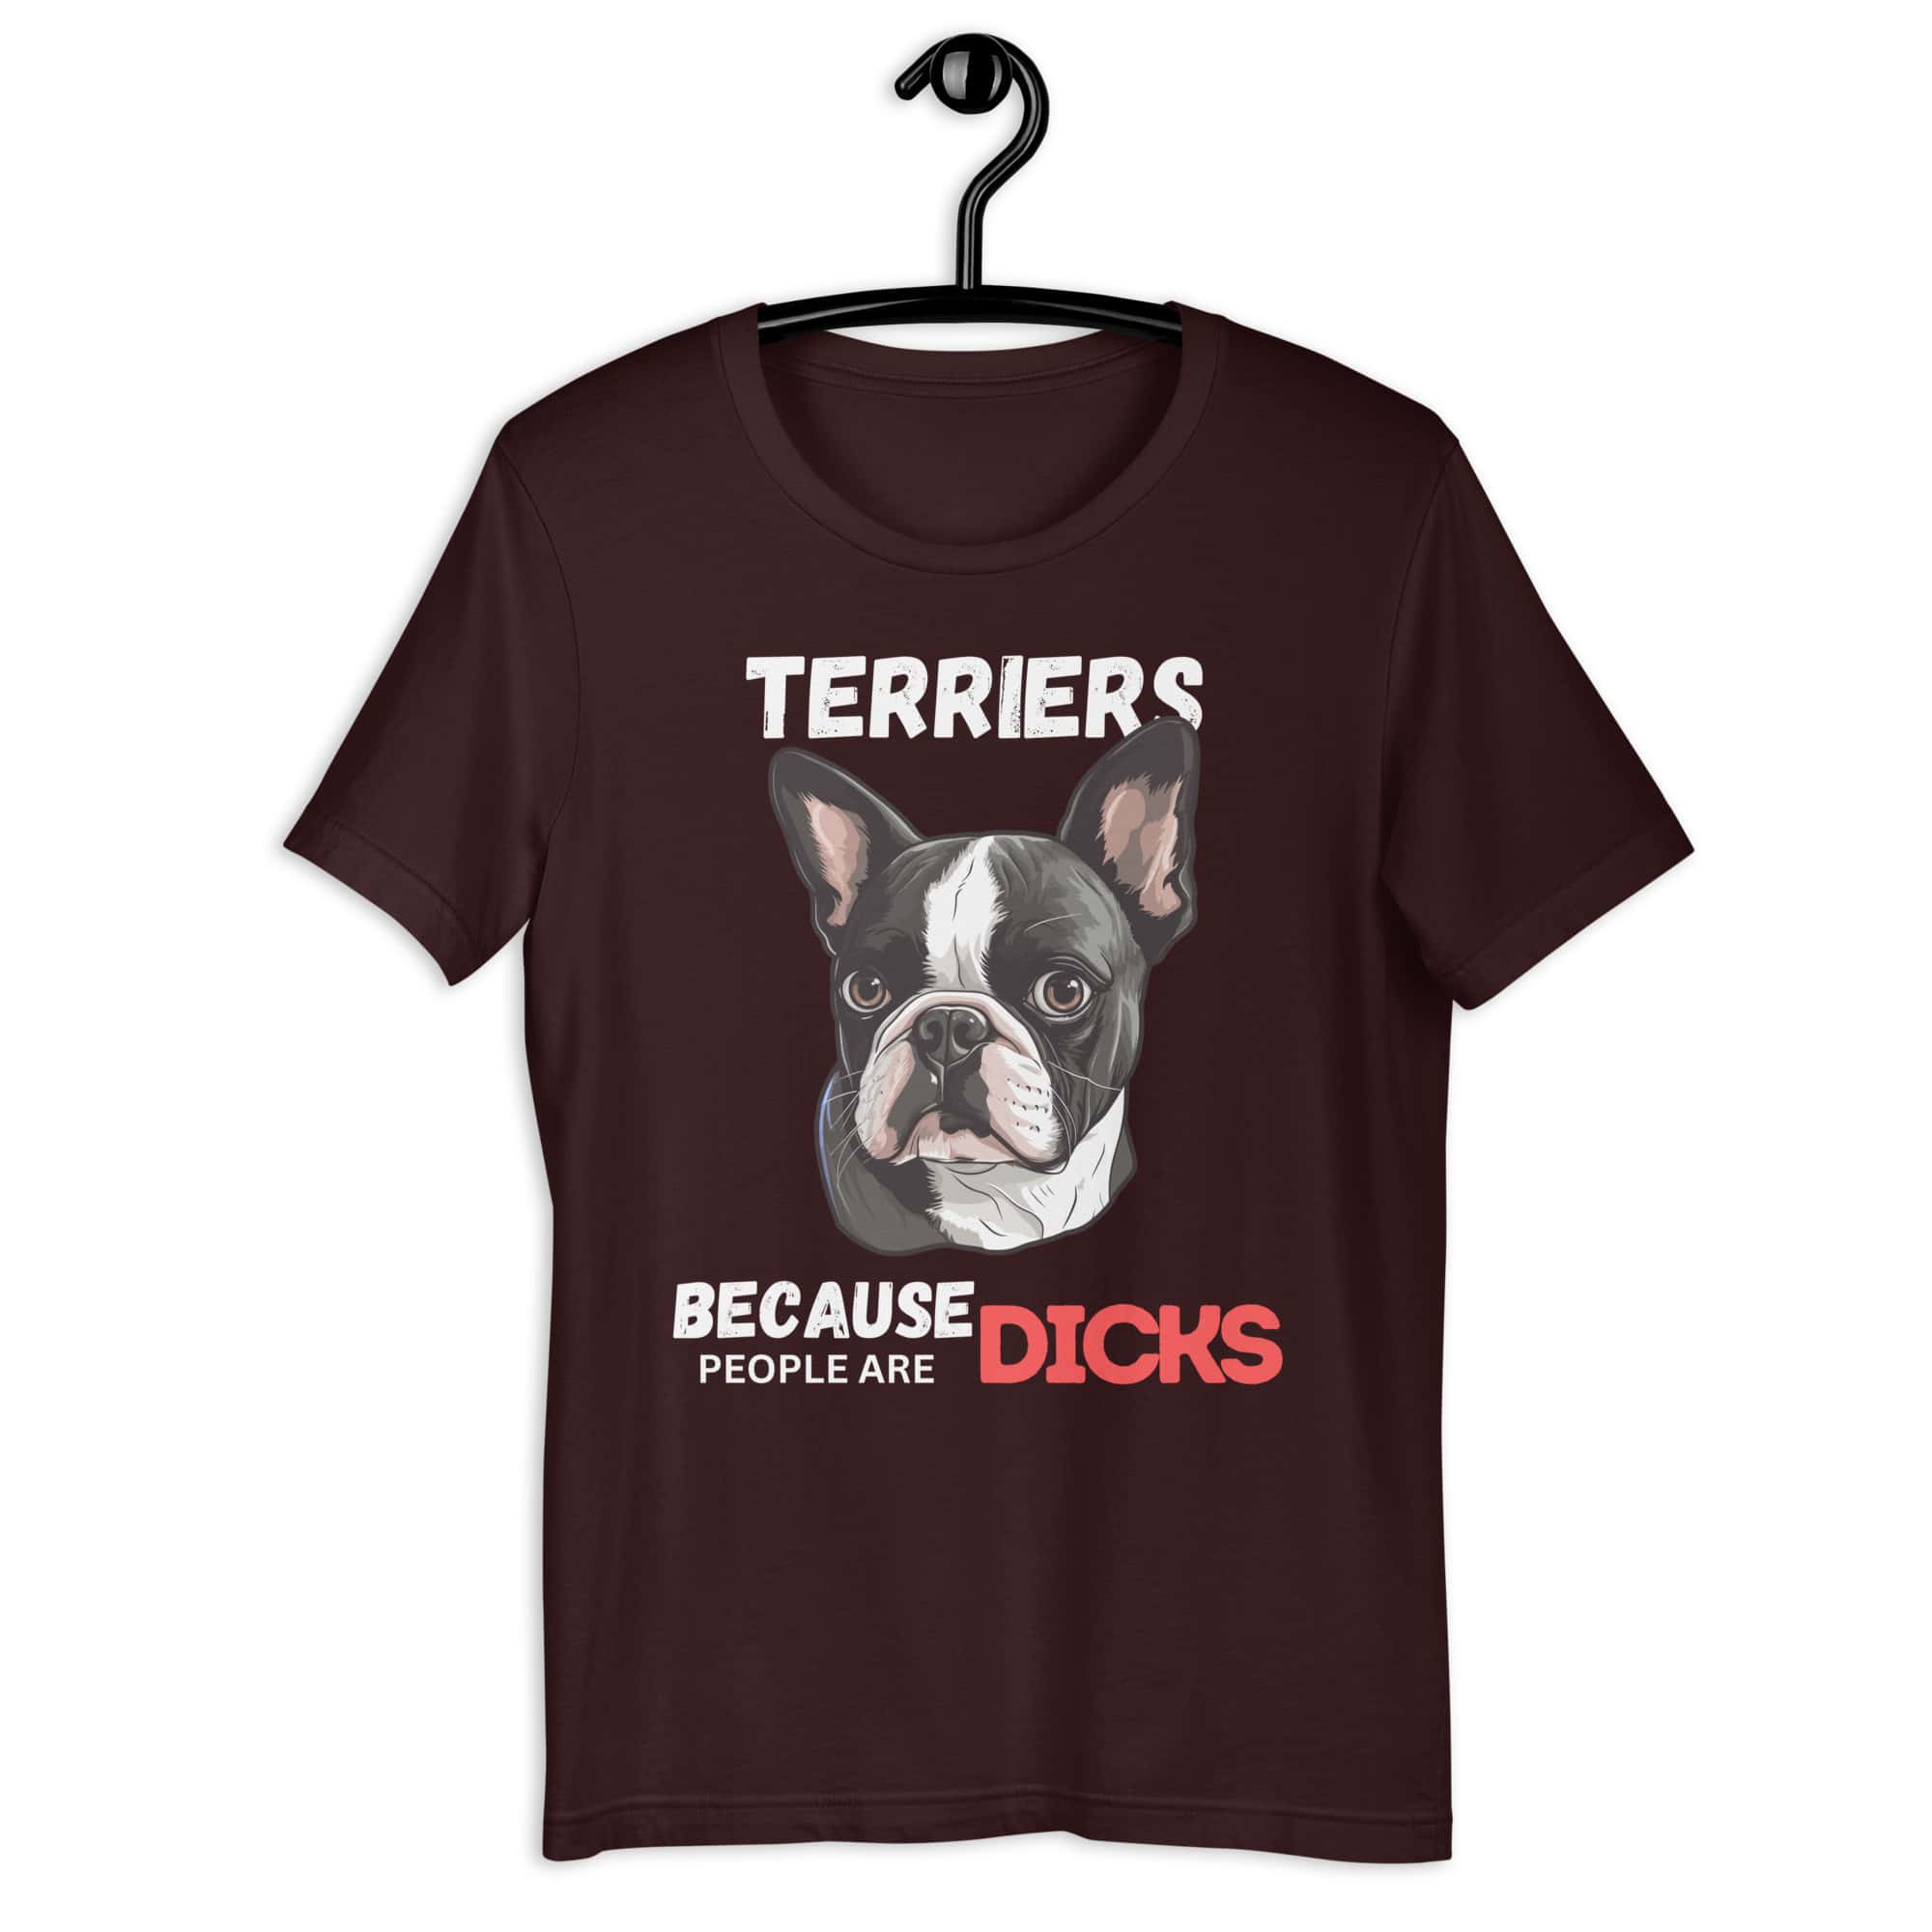 Terriers Because People Are Dicks Unisex T-Shirt Brown